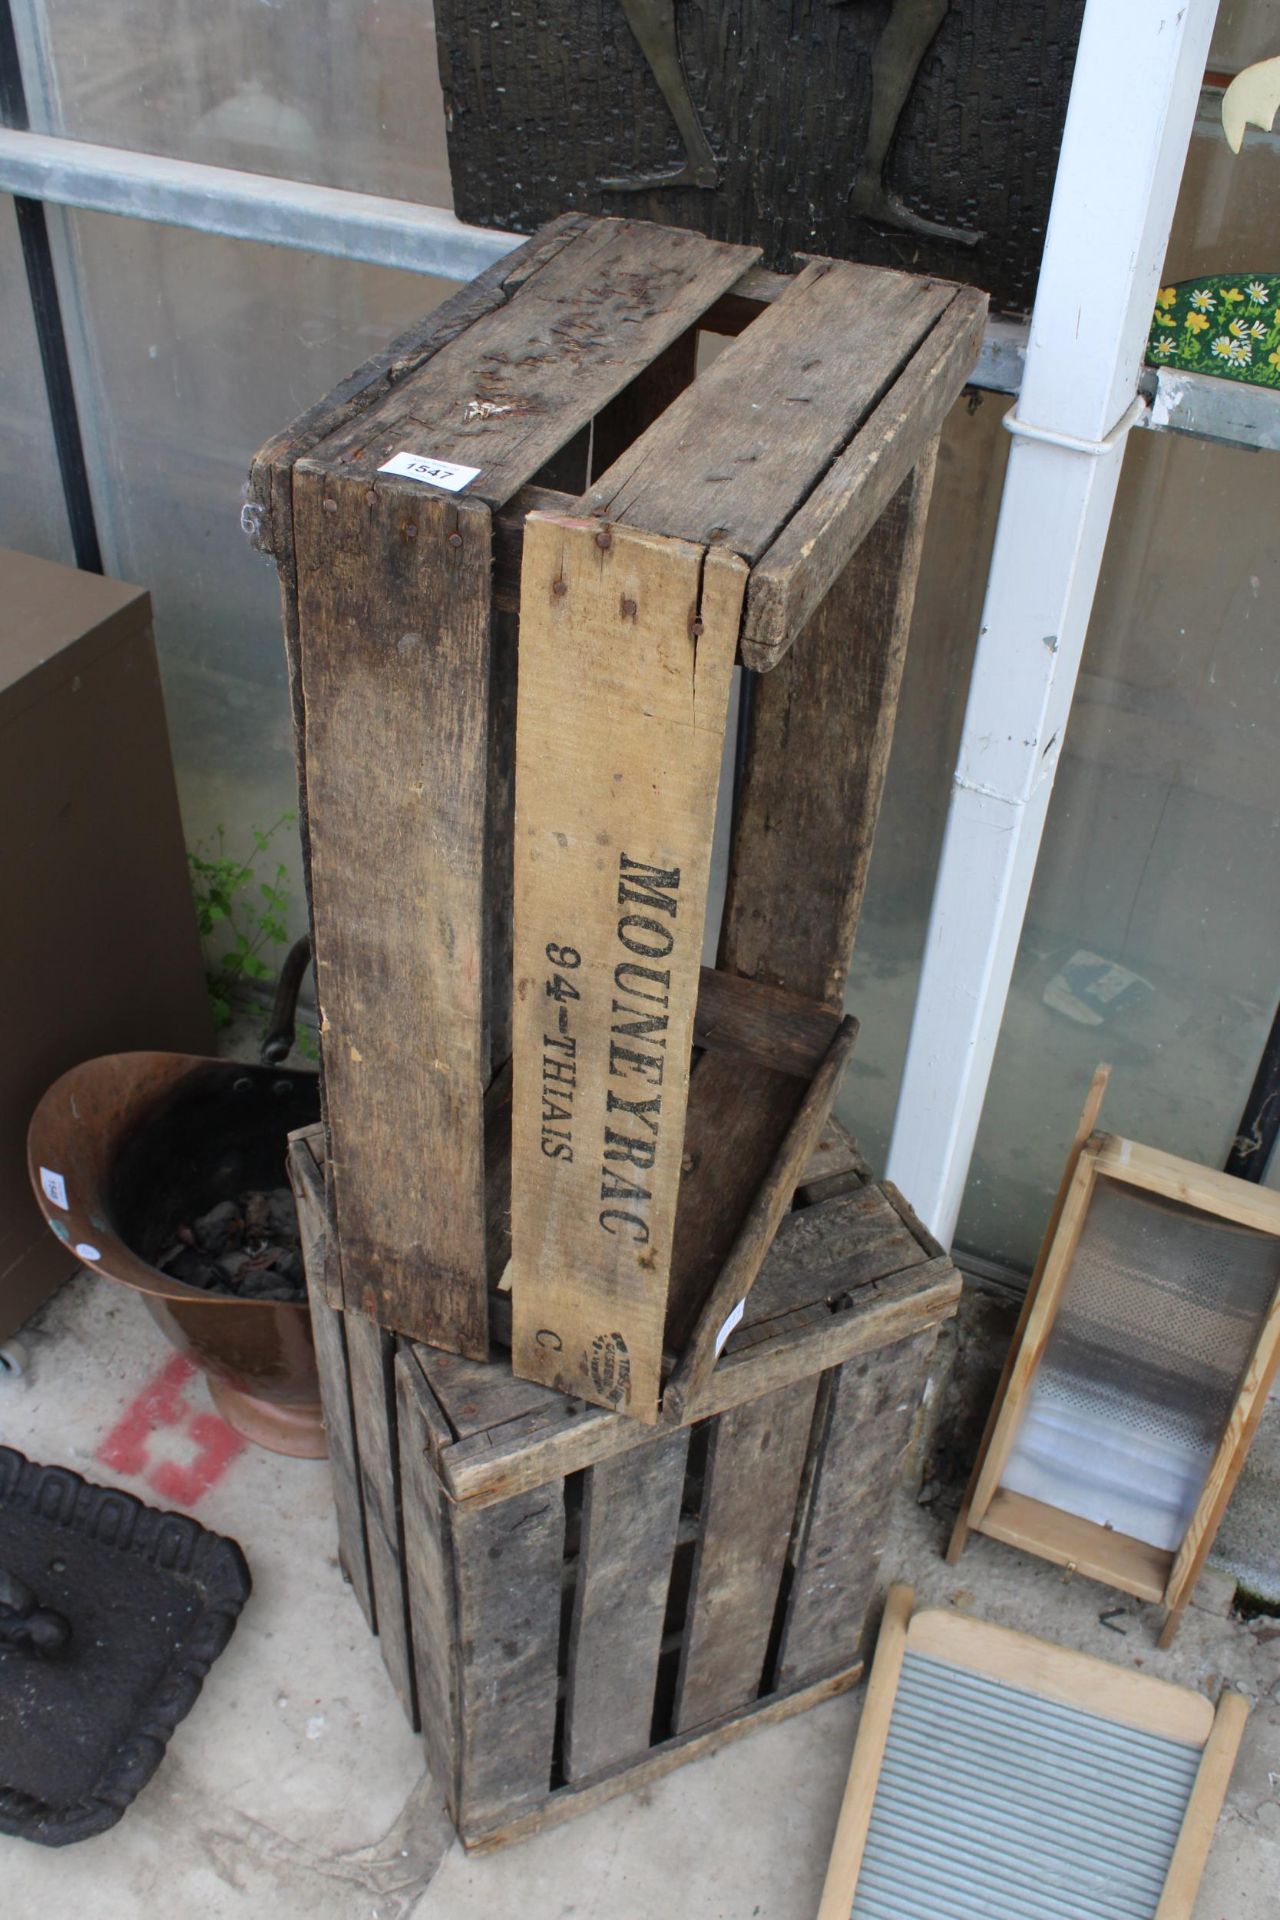 A VINTAGE MONOGRAMED WOODEN CRATE AND A FURTHER WOODEN CRATE